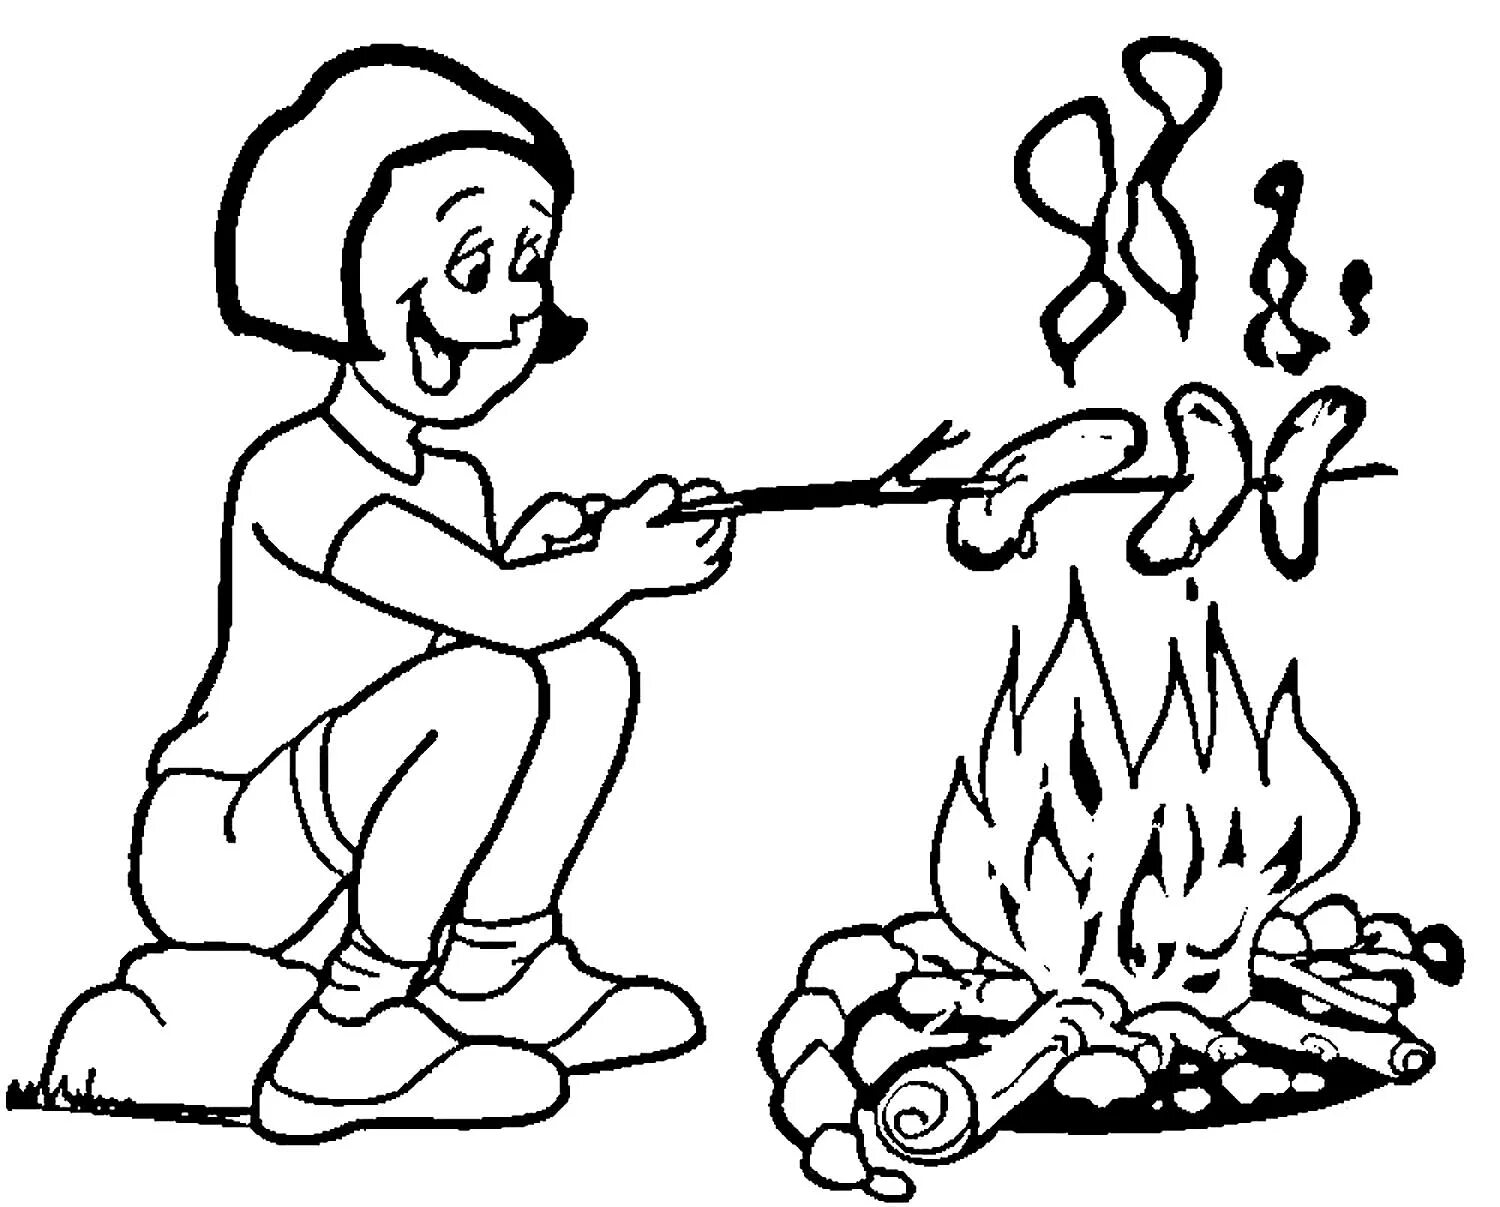 Exquisite fire friend fire enemy coloring book for kids